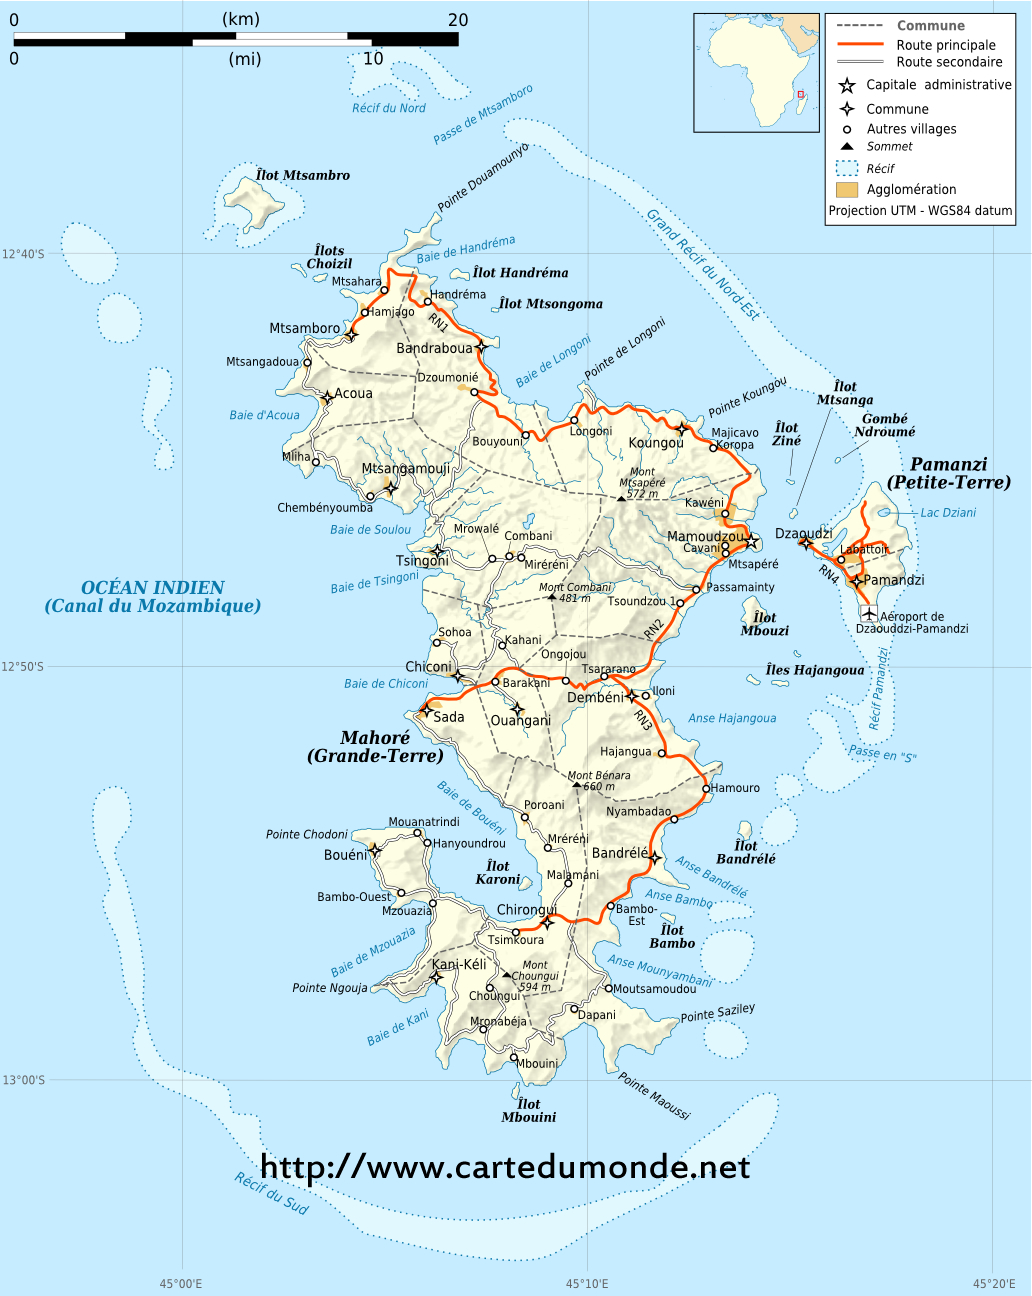 Mayotte, Population, History, Map, & Facts